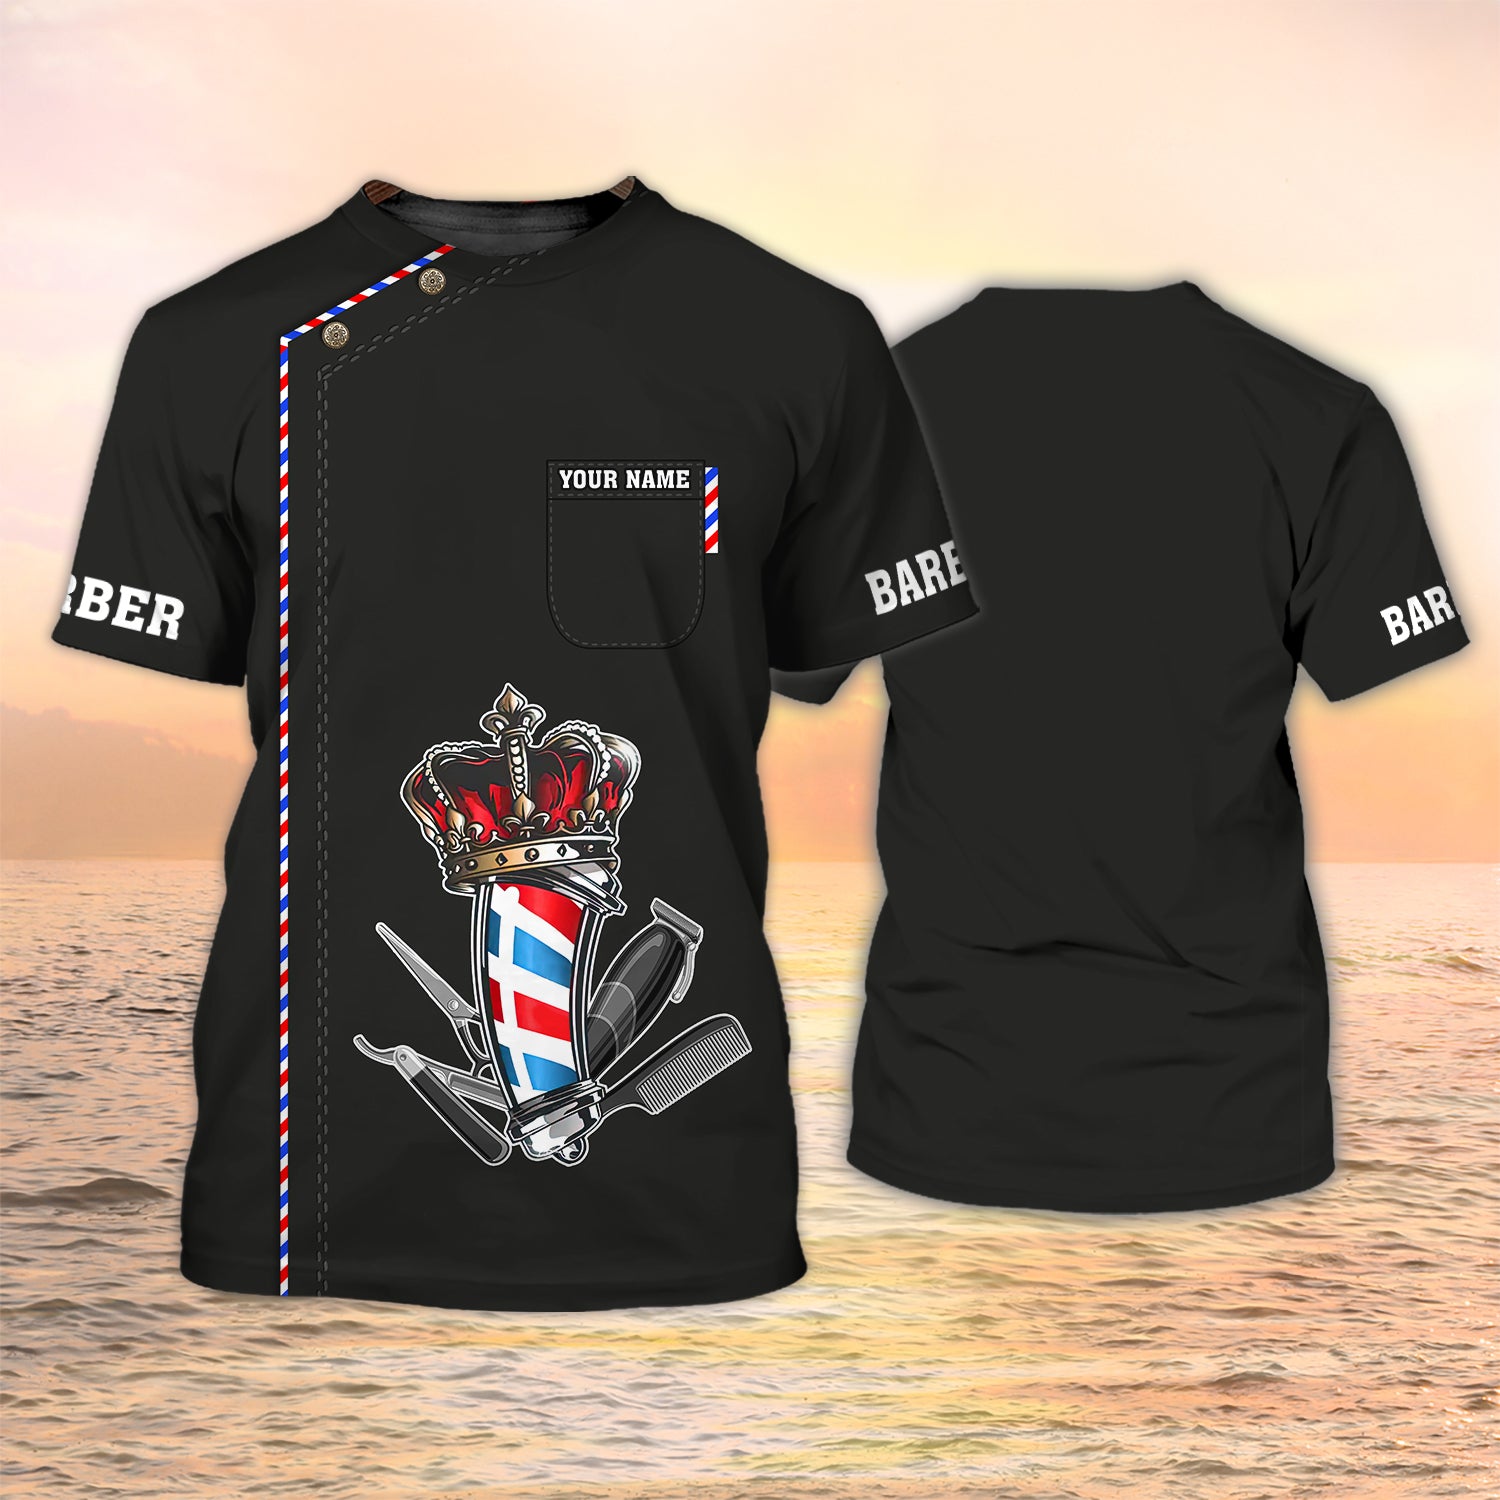 Barber Shop T Shirt Barber Personalized 3D Shirt Barber Clothing [Non Workwear]